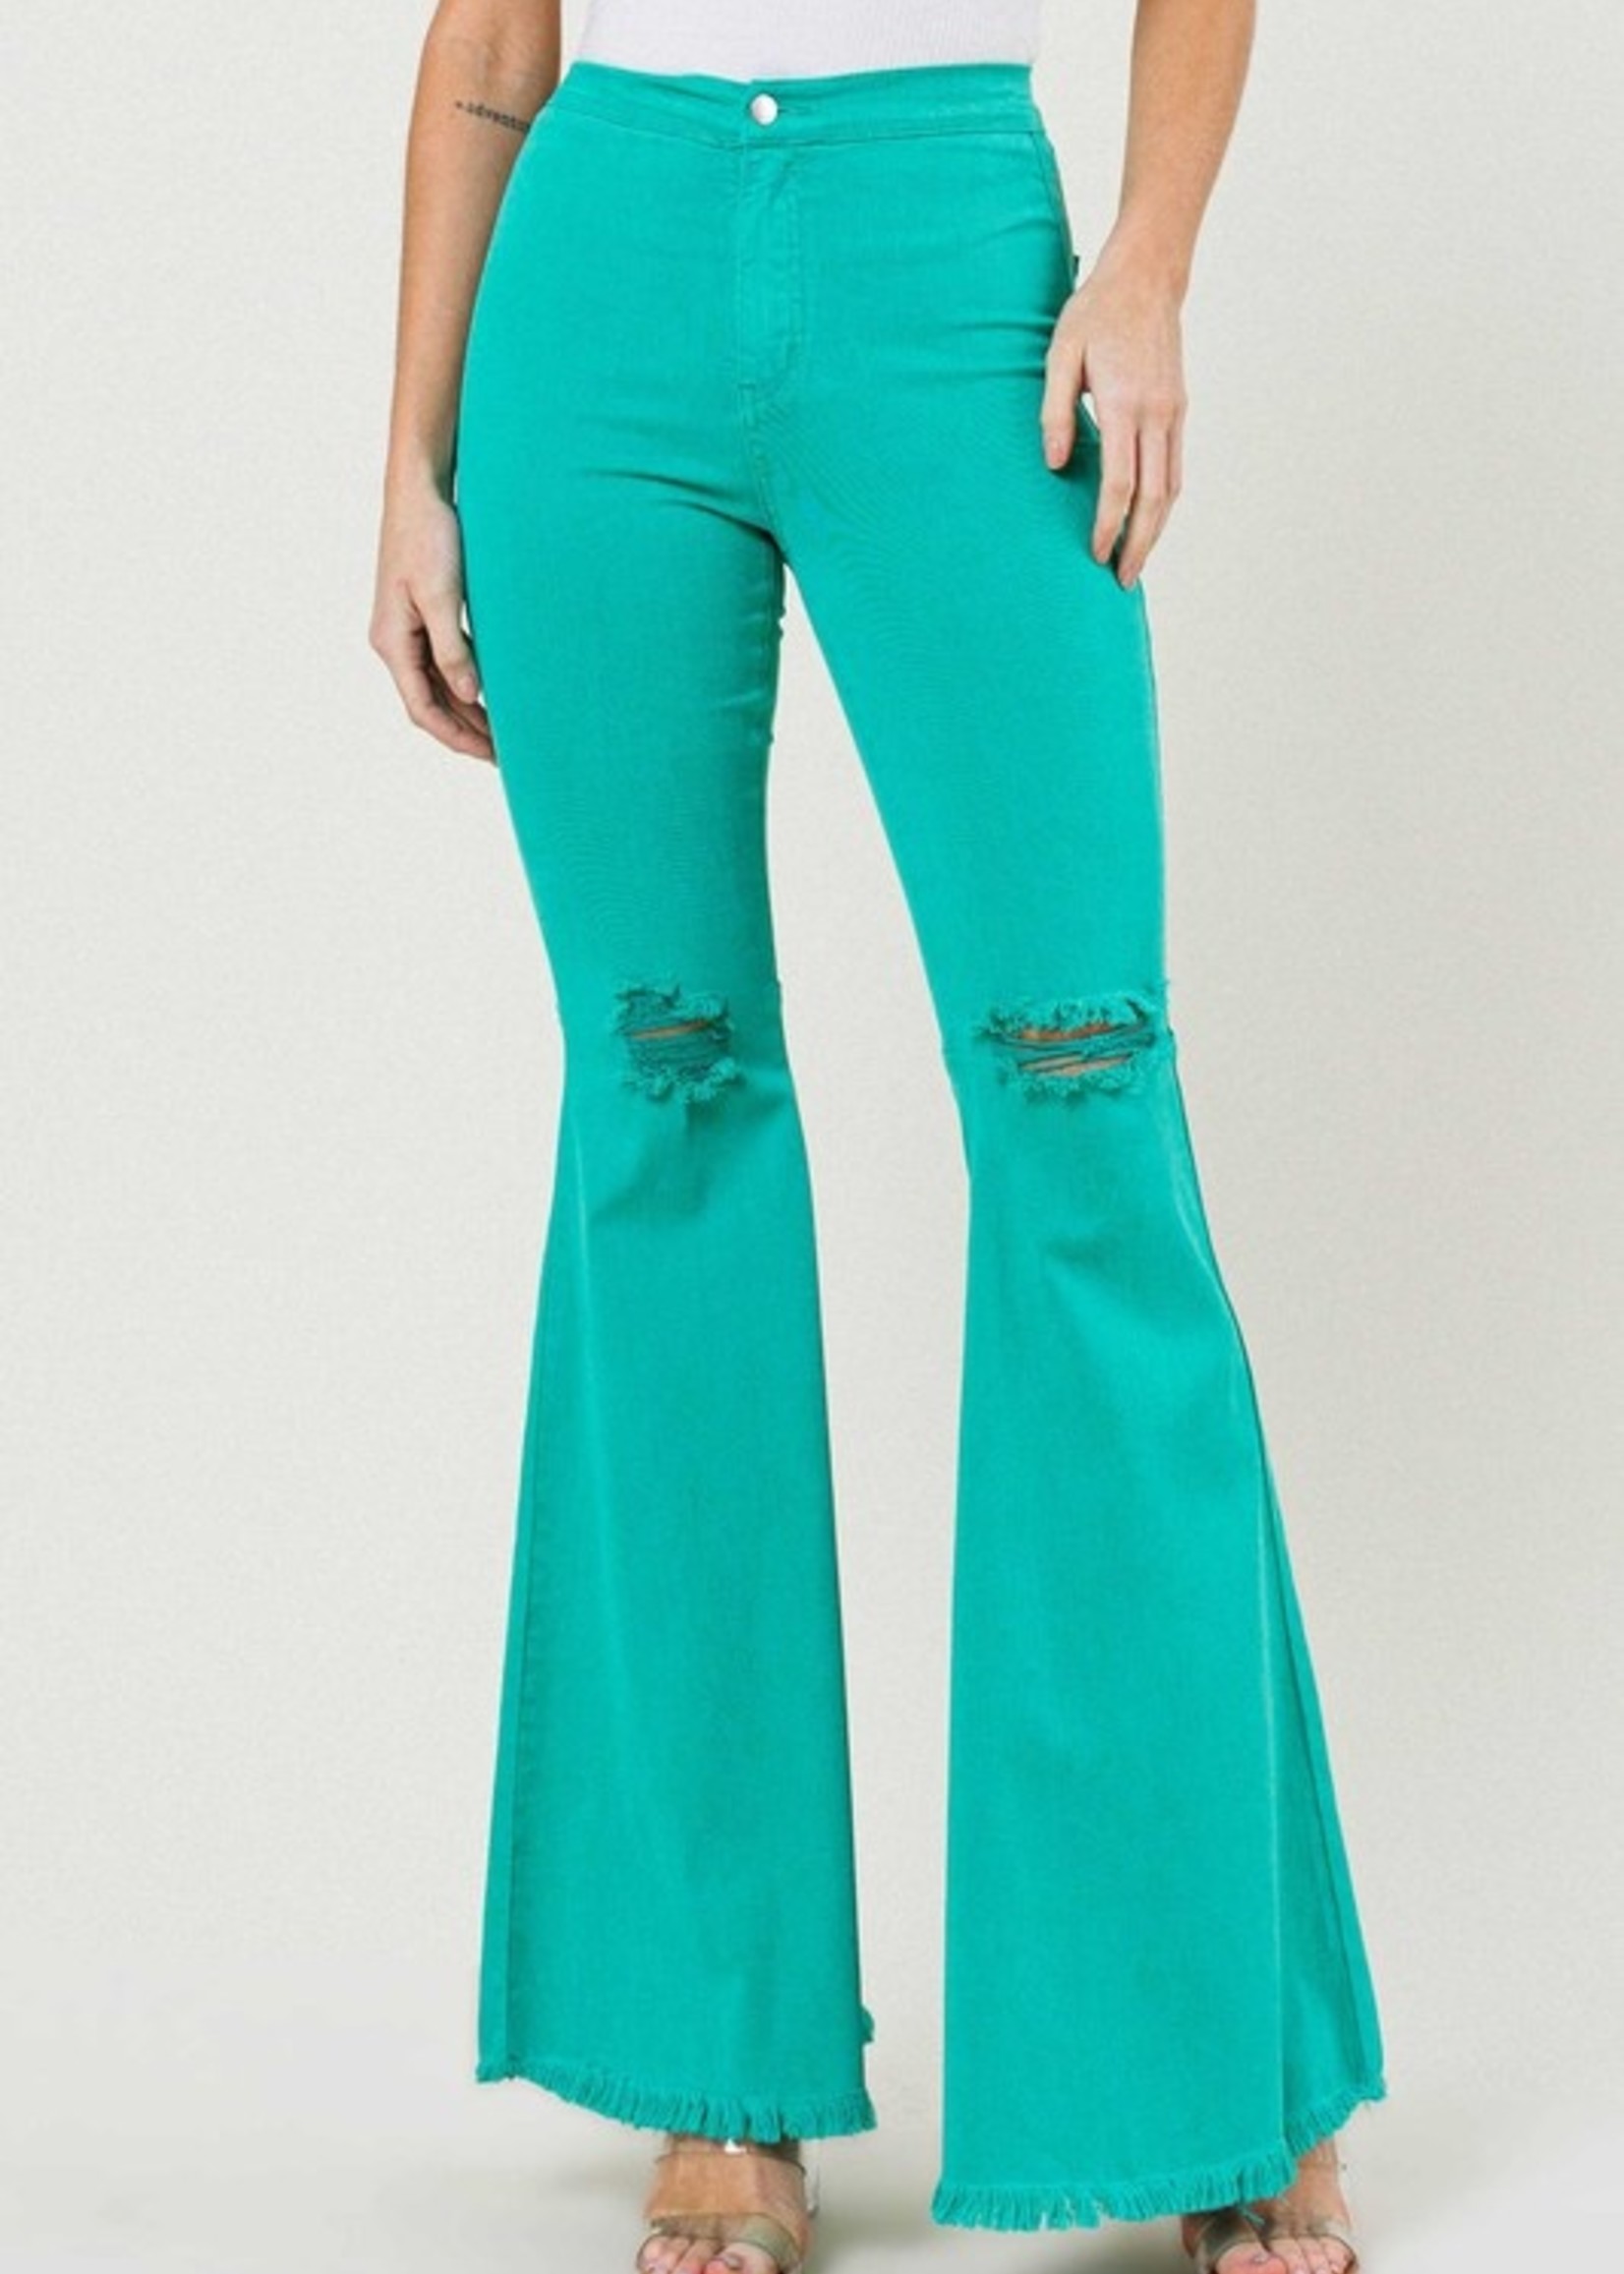 Highed Waisted Green Flares